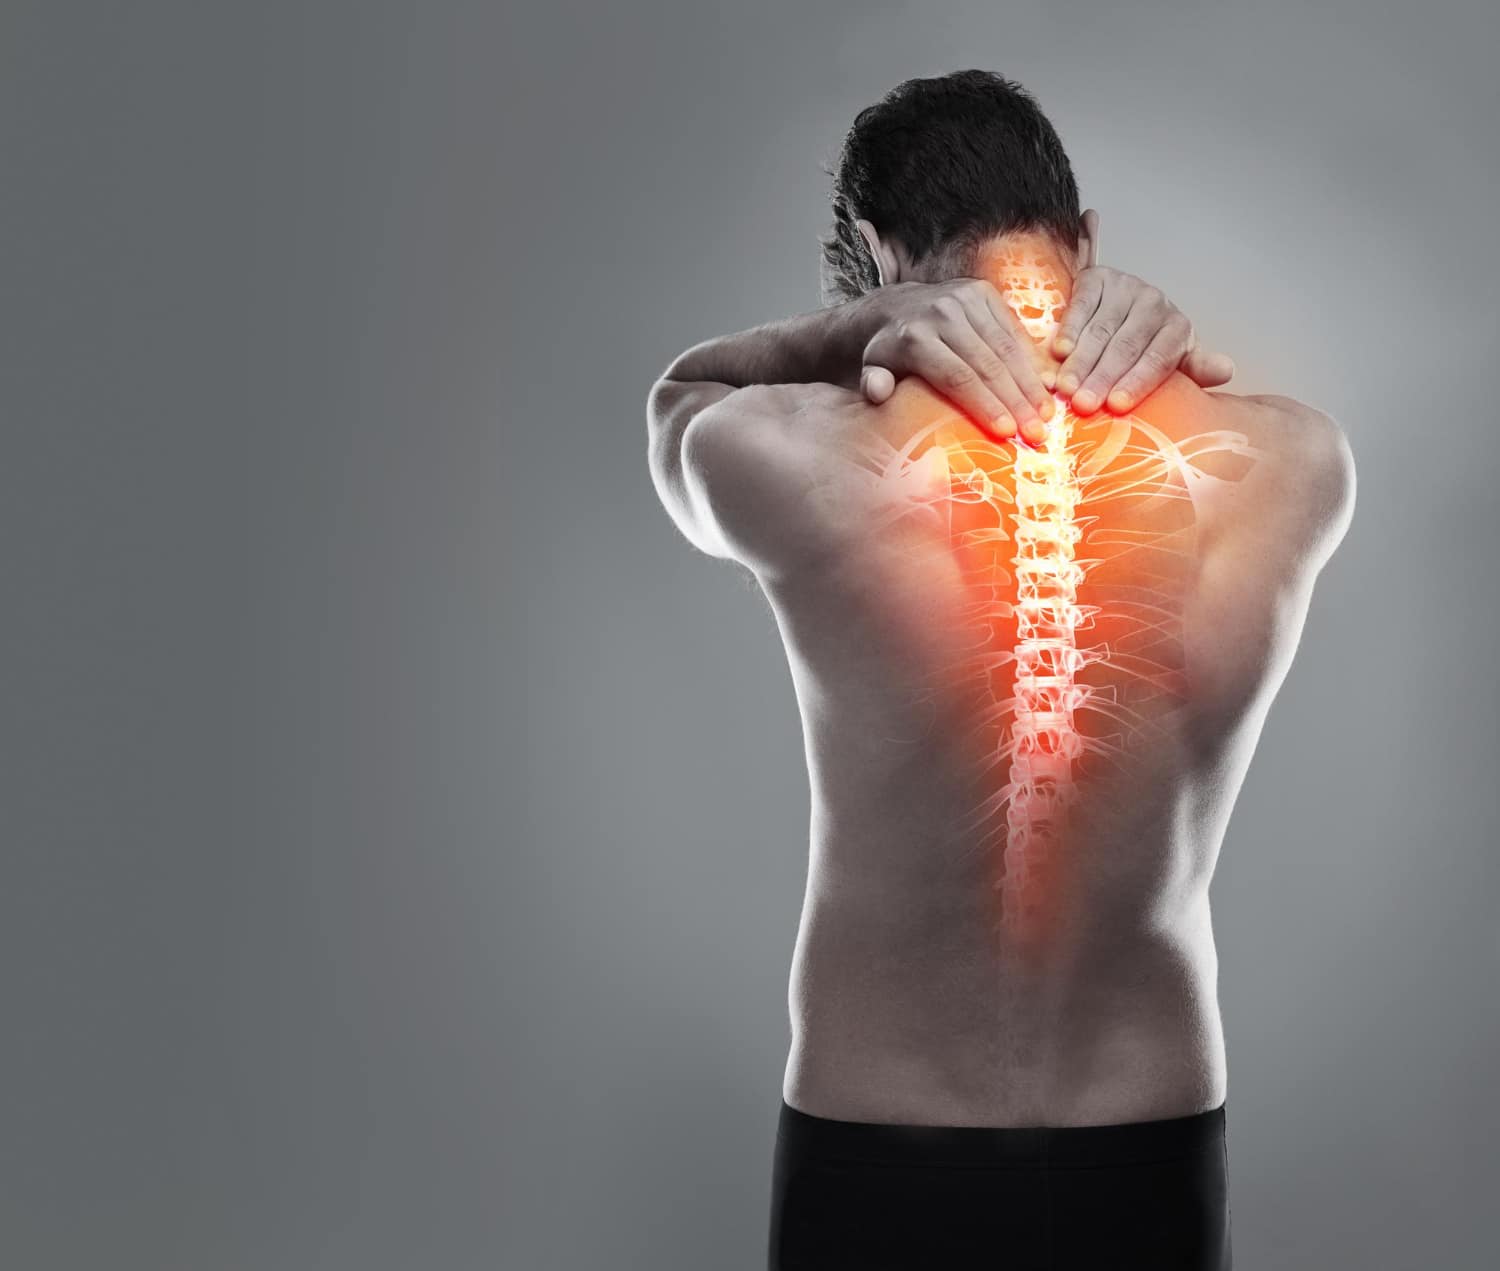 Neck and Back Injuries Lawyer